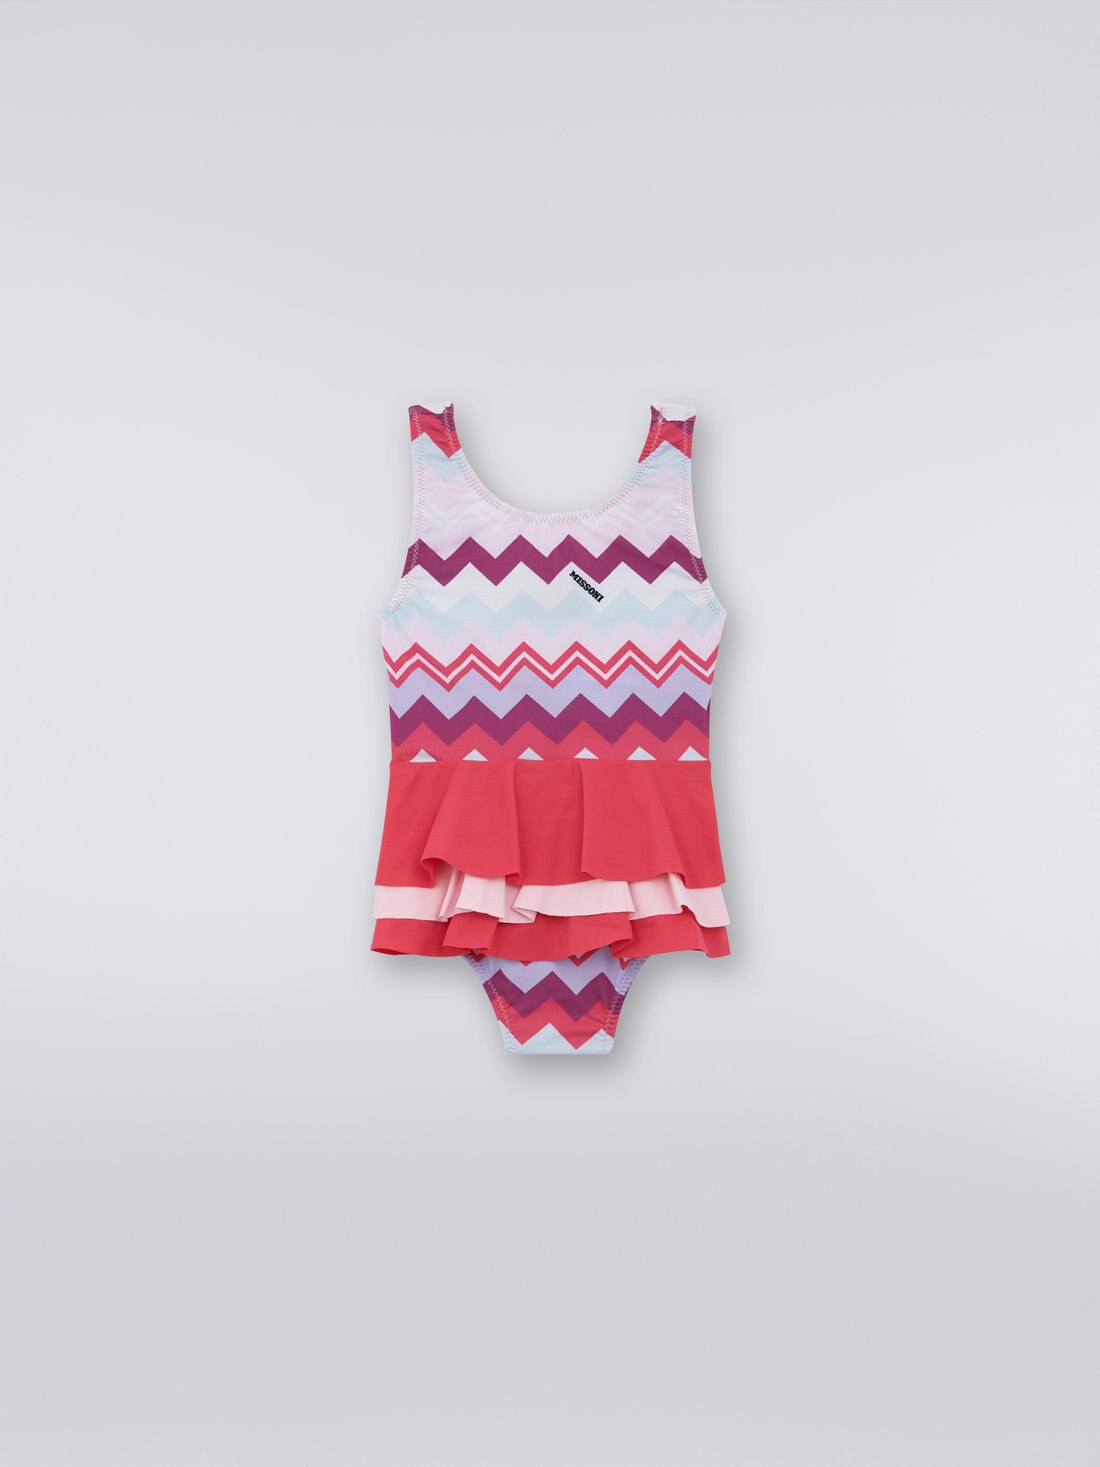 One-piece swimming costume with ruffle and zigzag pattern, Multicoloured  - KS23WP05BV00E0SM96I - 0